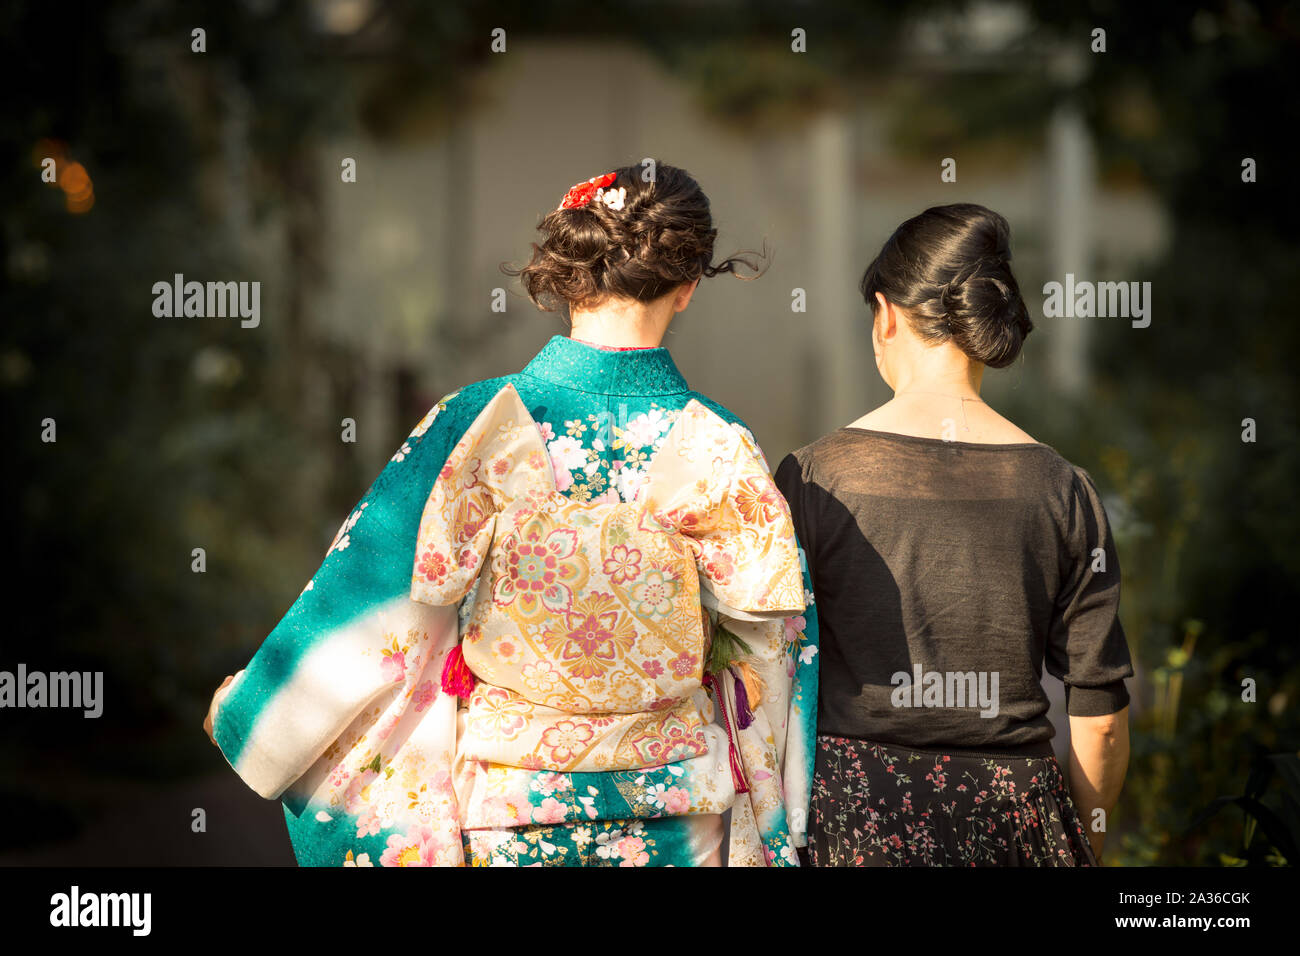 A Japanese woman wearing kimono accompanied by another woman in black dress. Stock Photo